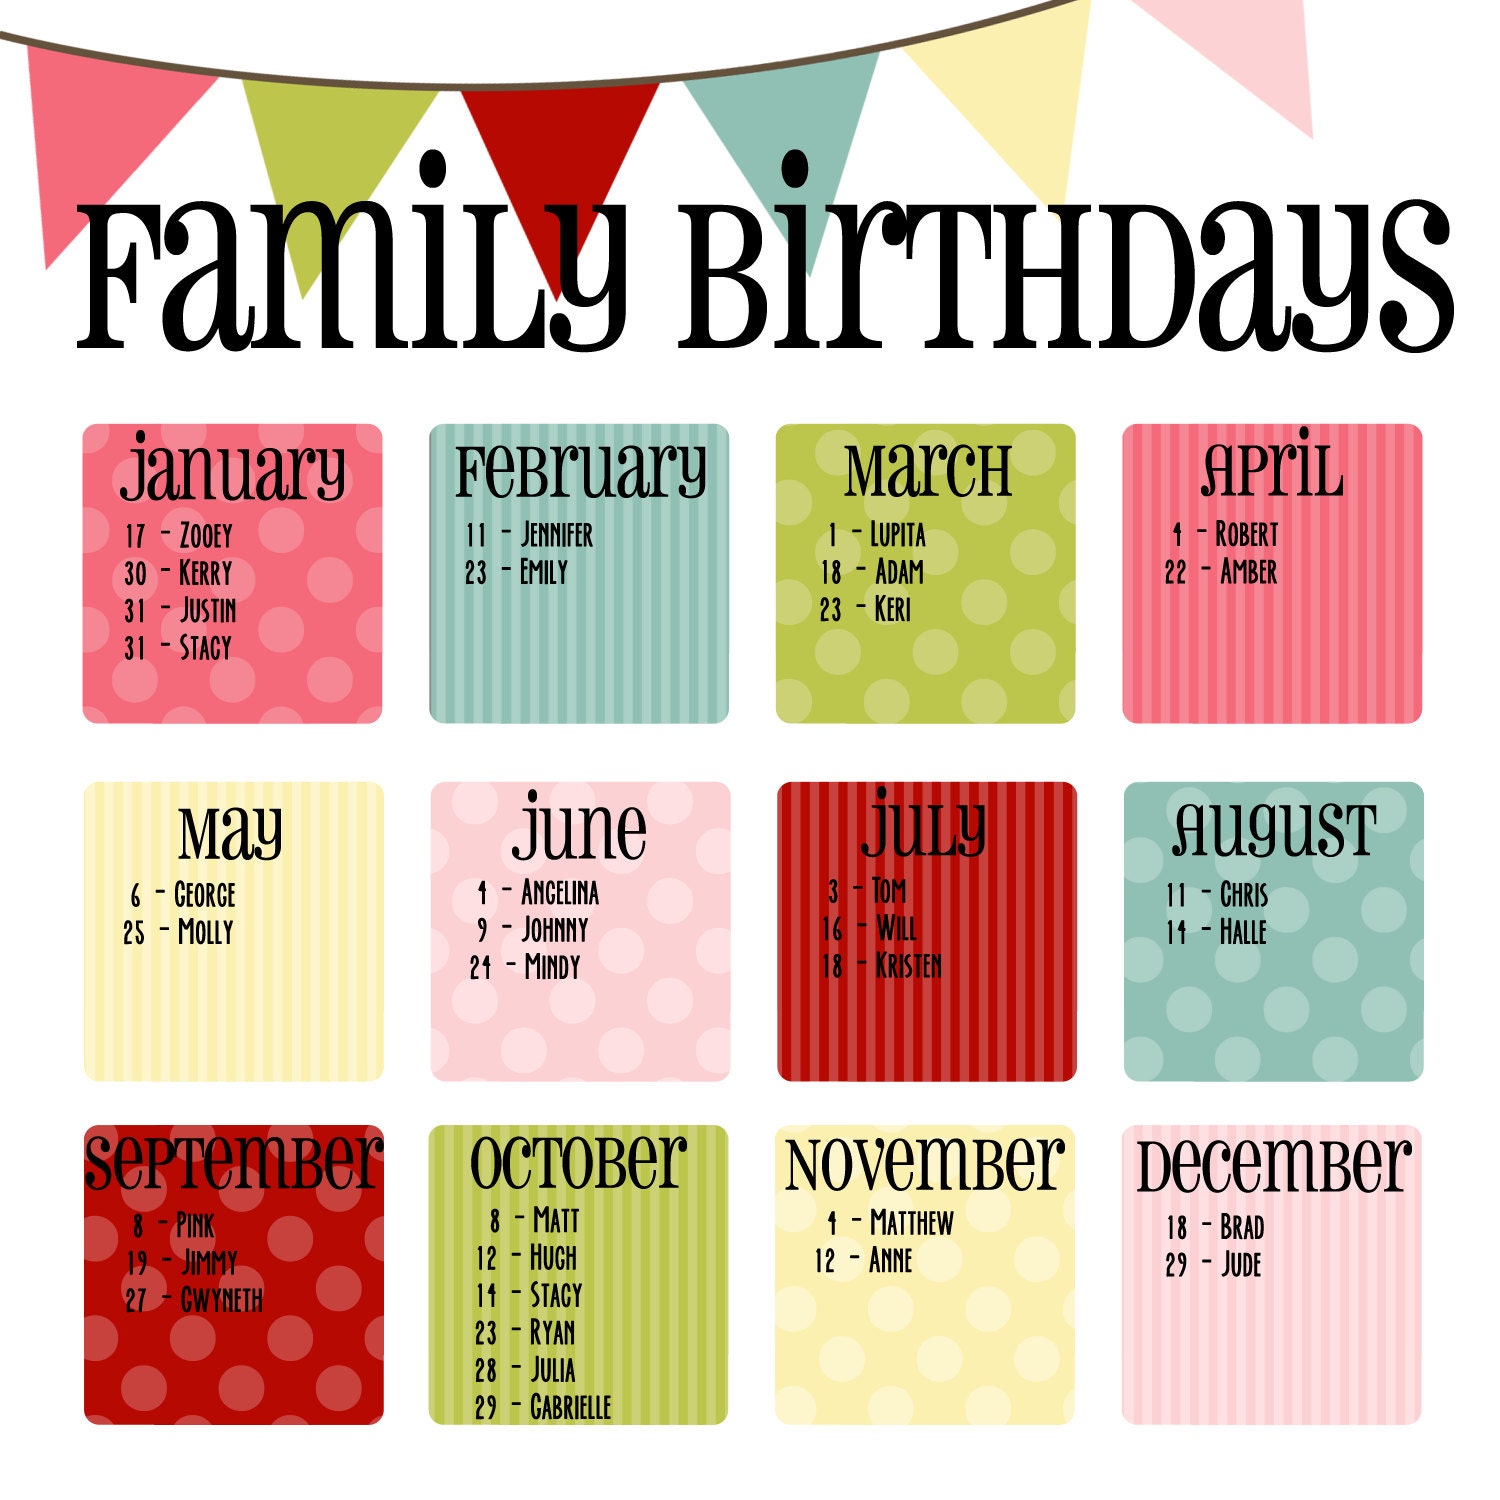 how-to-fillable-birthday-calendar-template-excel-get-your-calendar-create-your-birthday